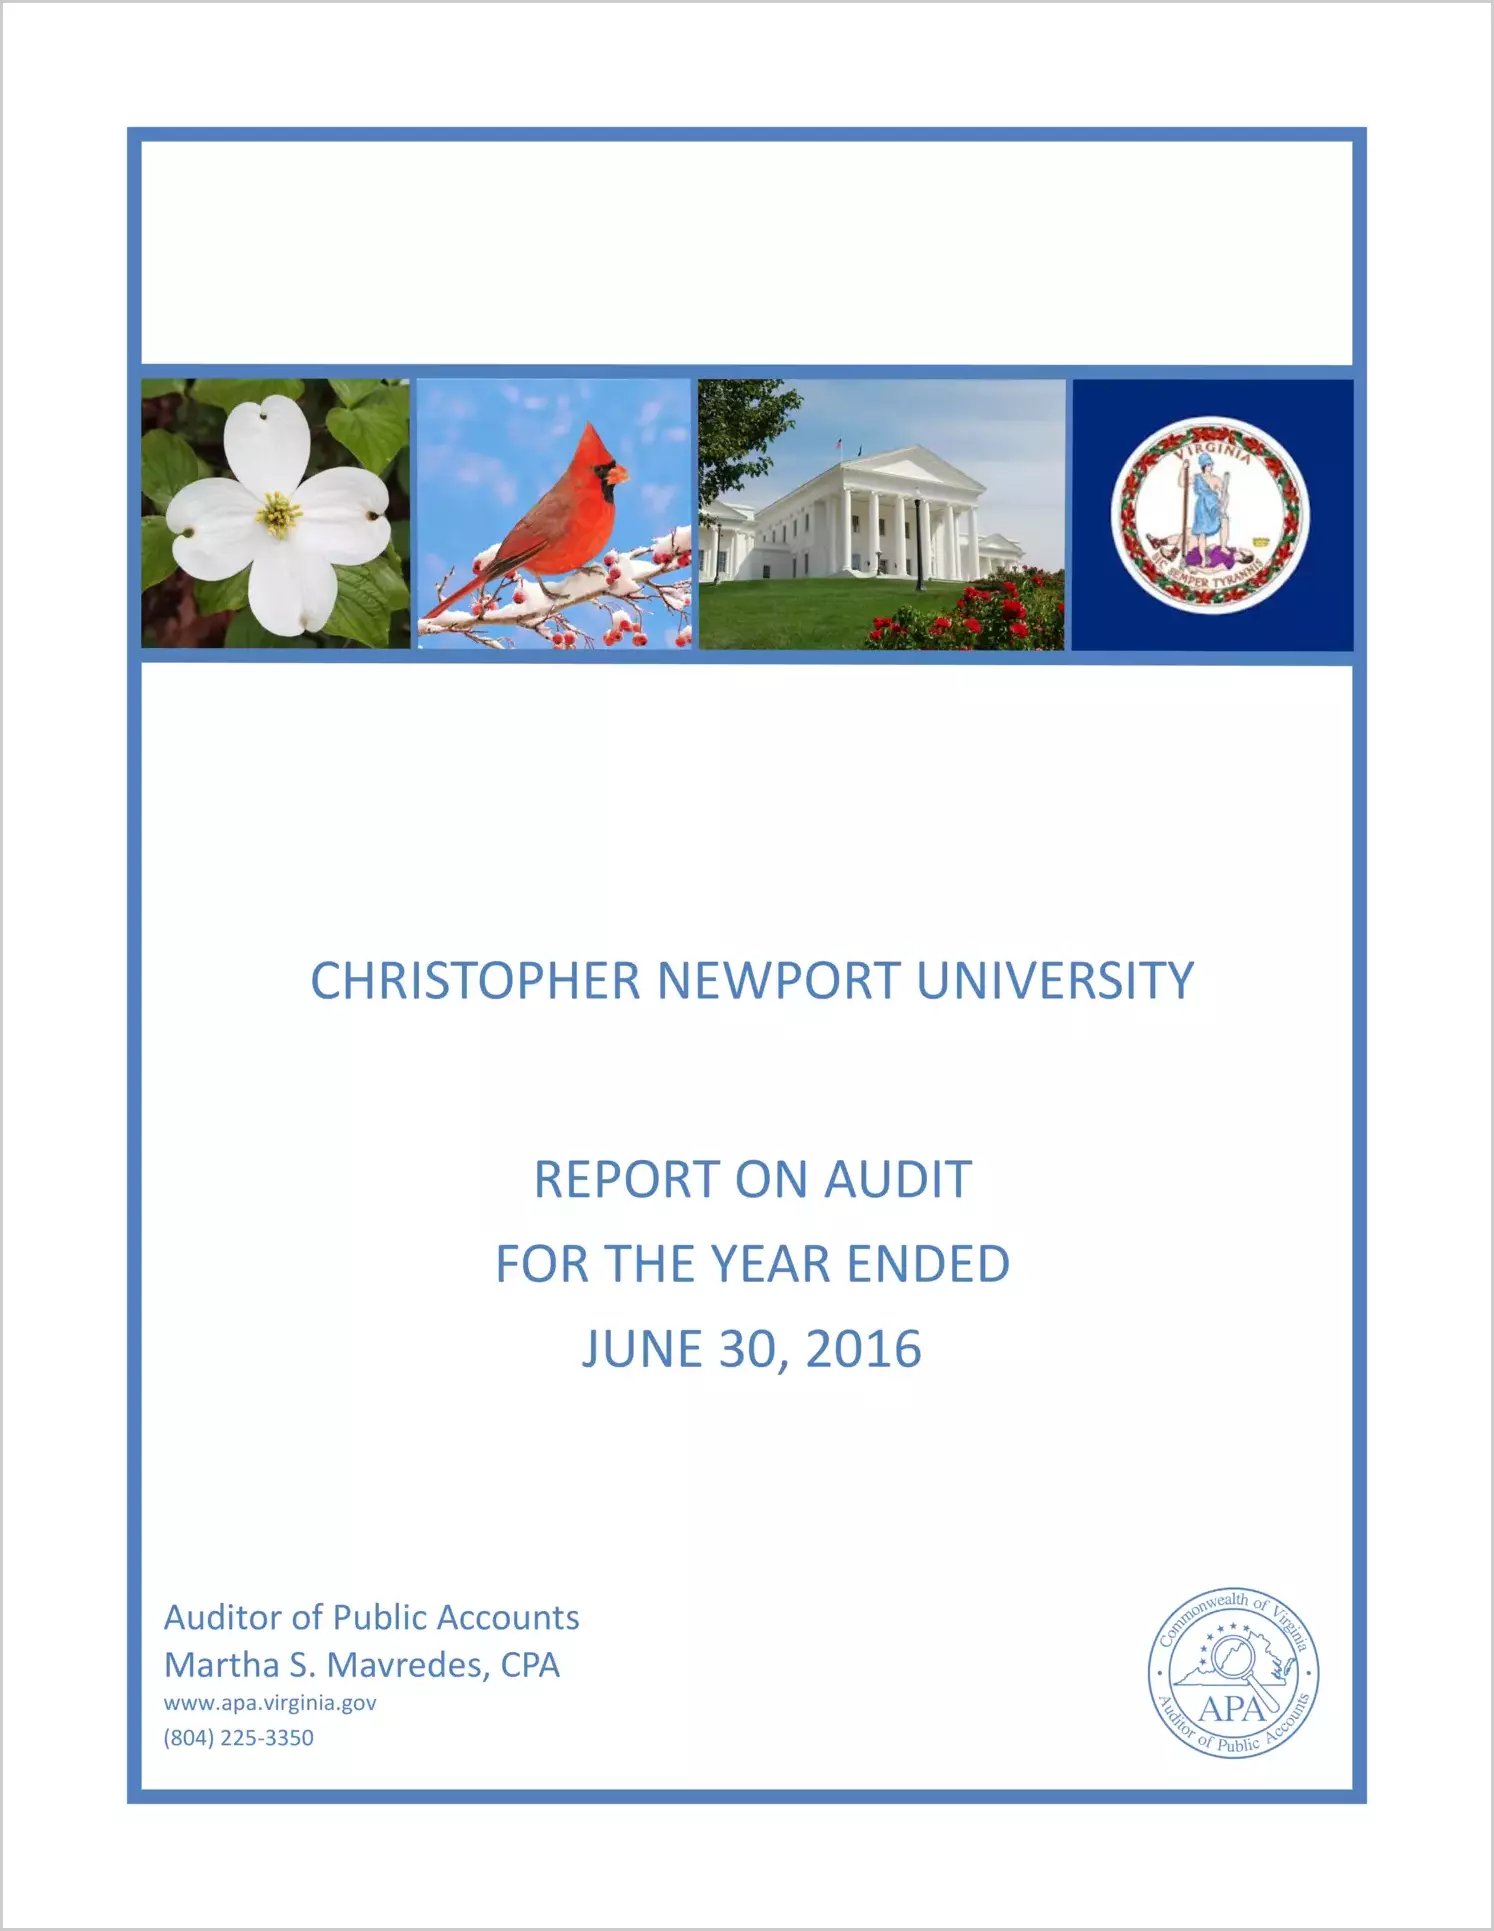 Christopher Newport University for the year ended June 30, 2016